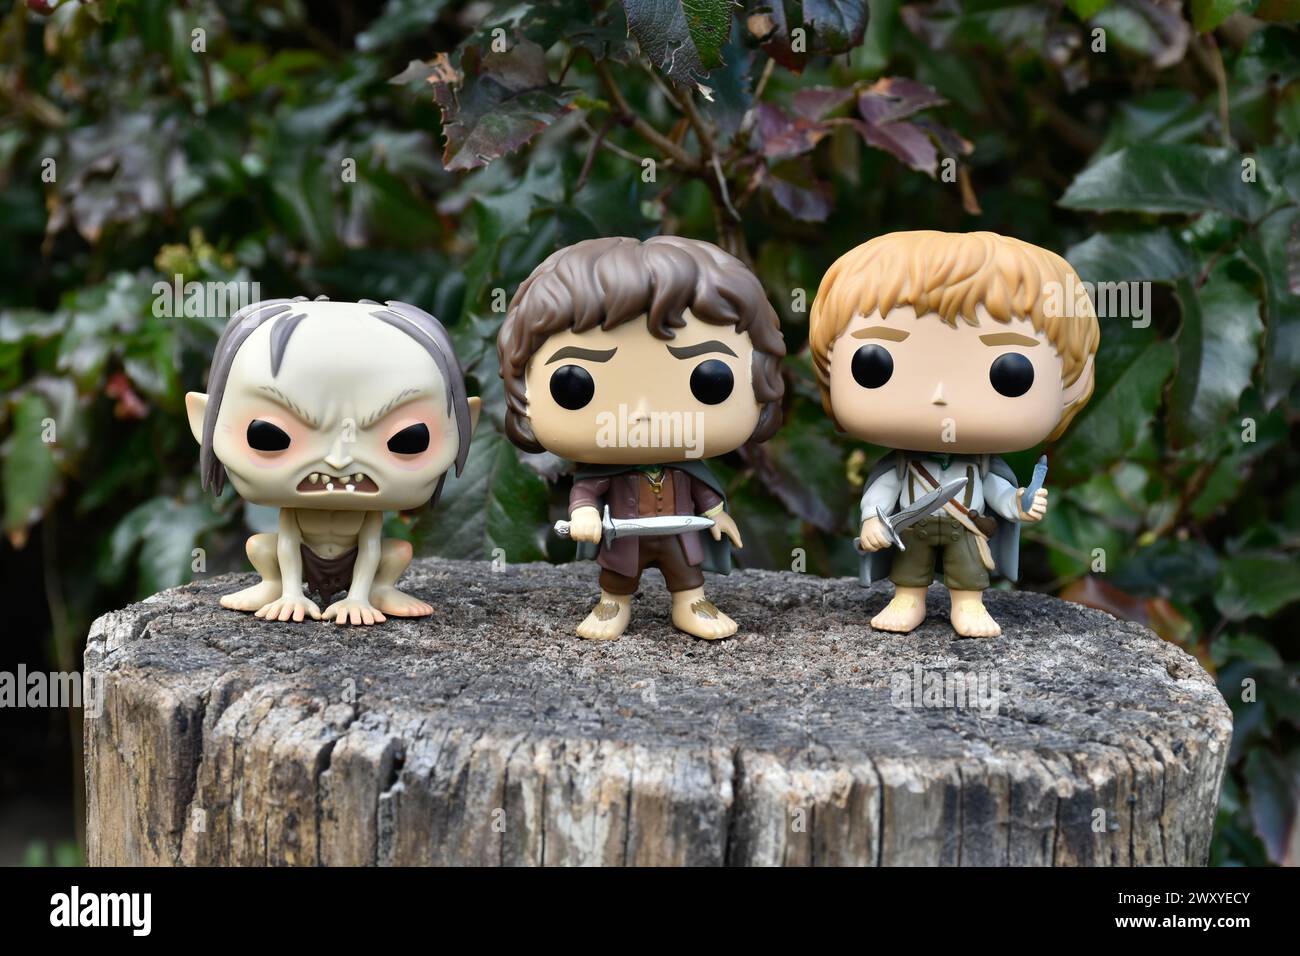 Funko Pop action figures of Gollum, Frodo and Sam hobbits from fantasy movie The Lord of the Rings. Dark forest, tree stump, green leaves. Stock Photo